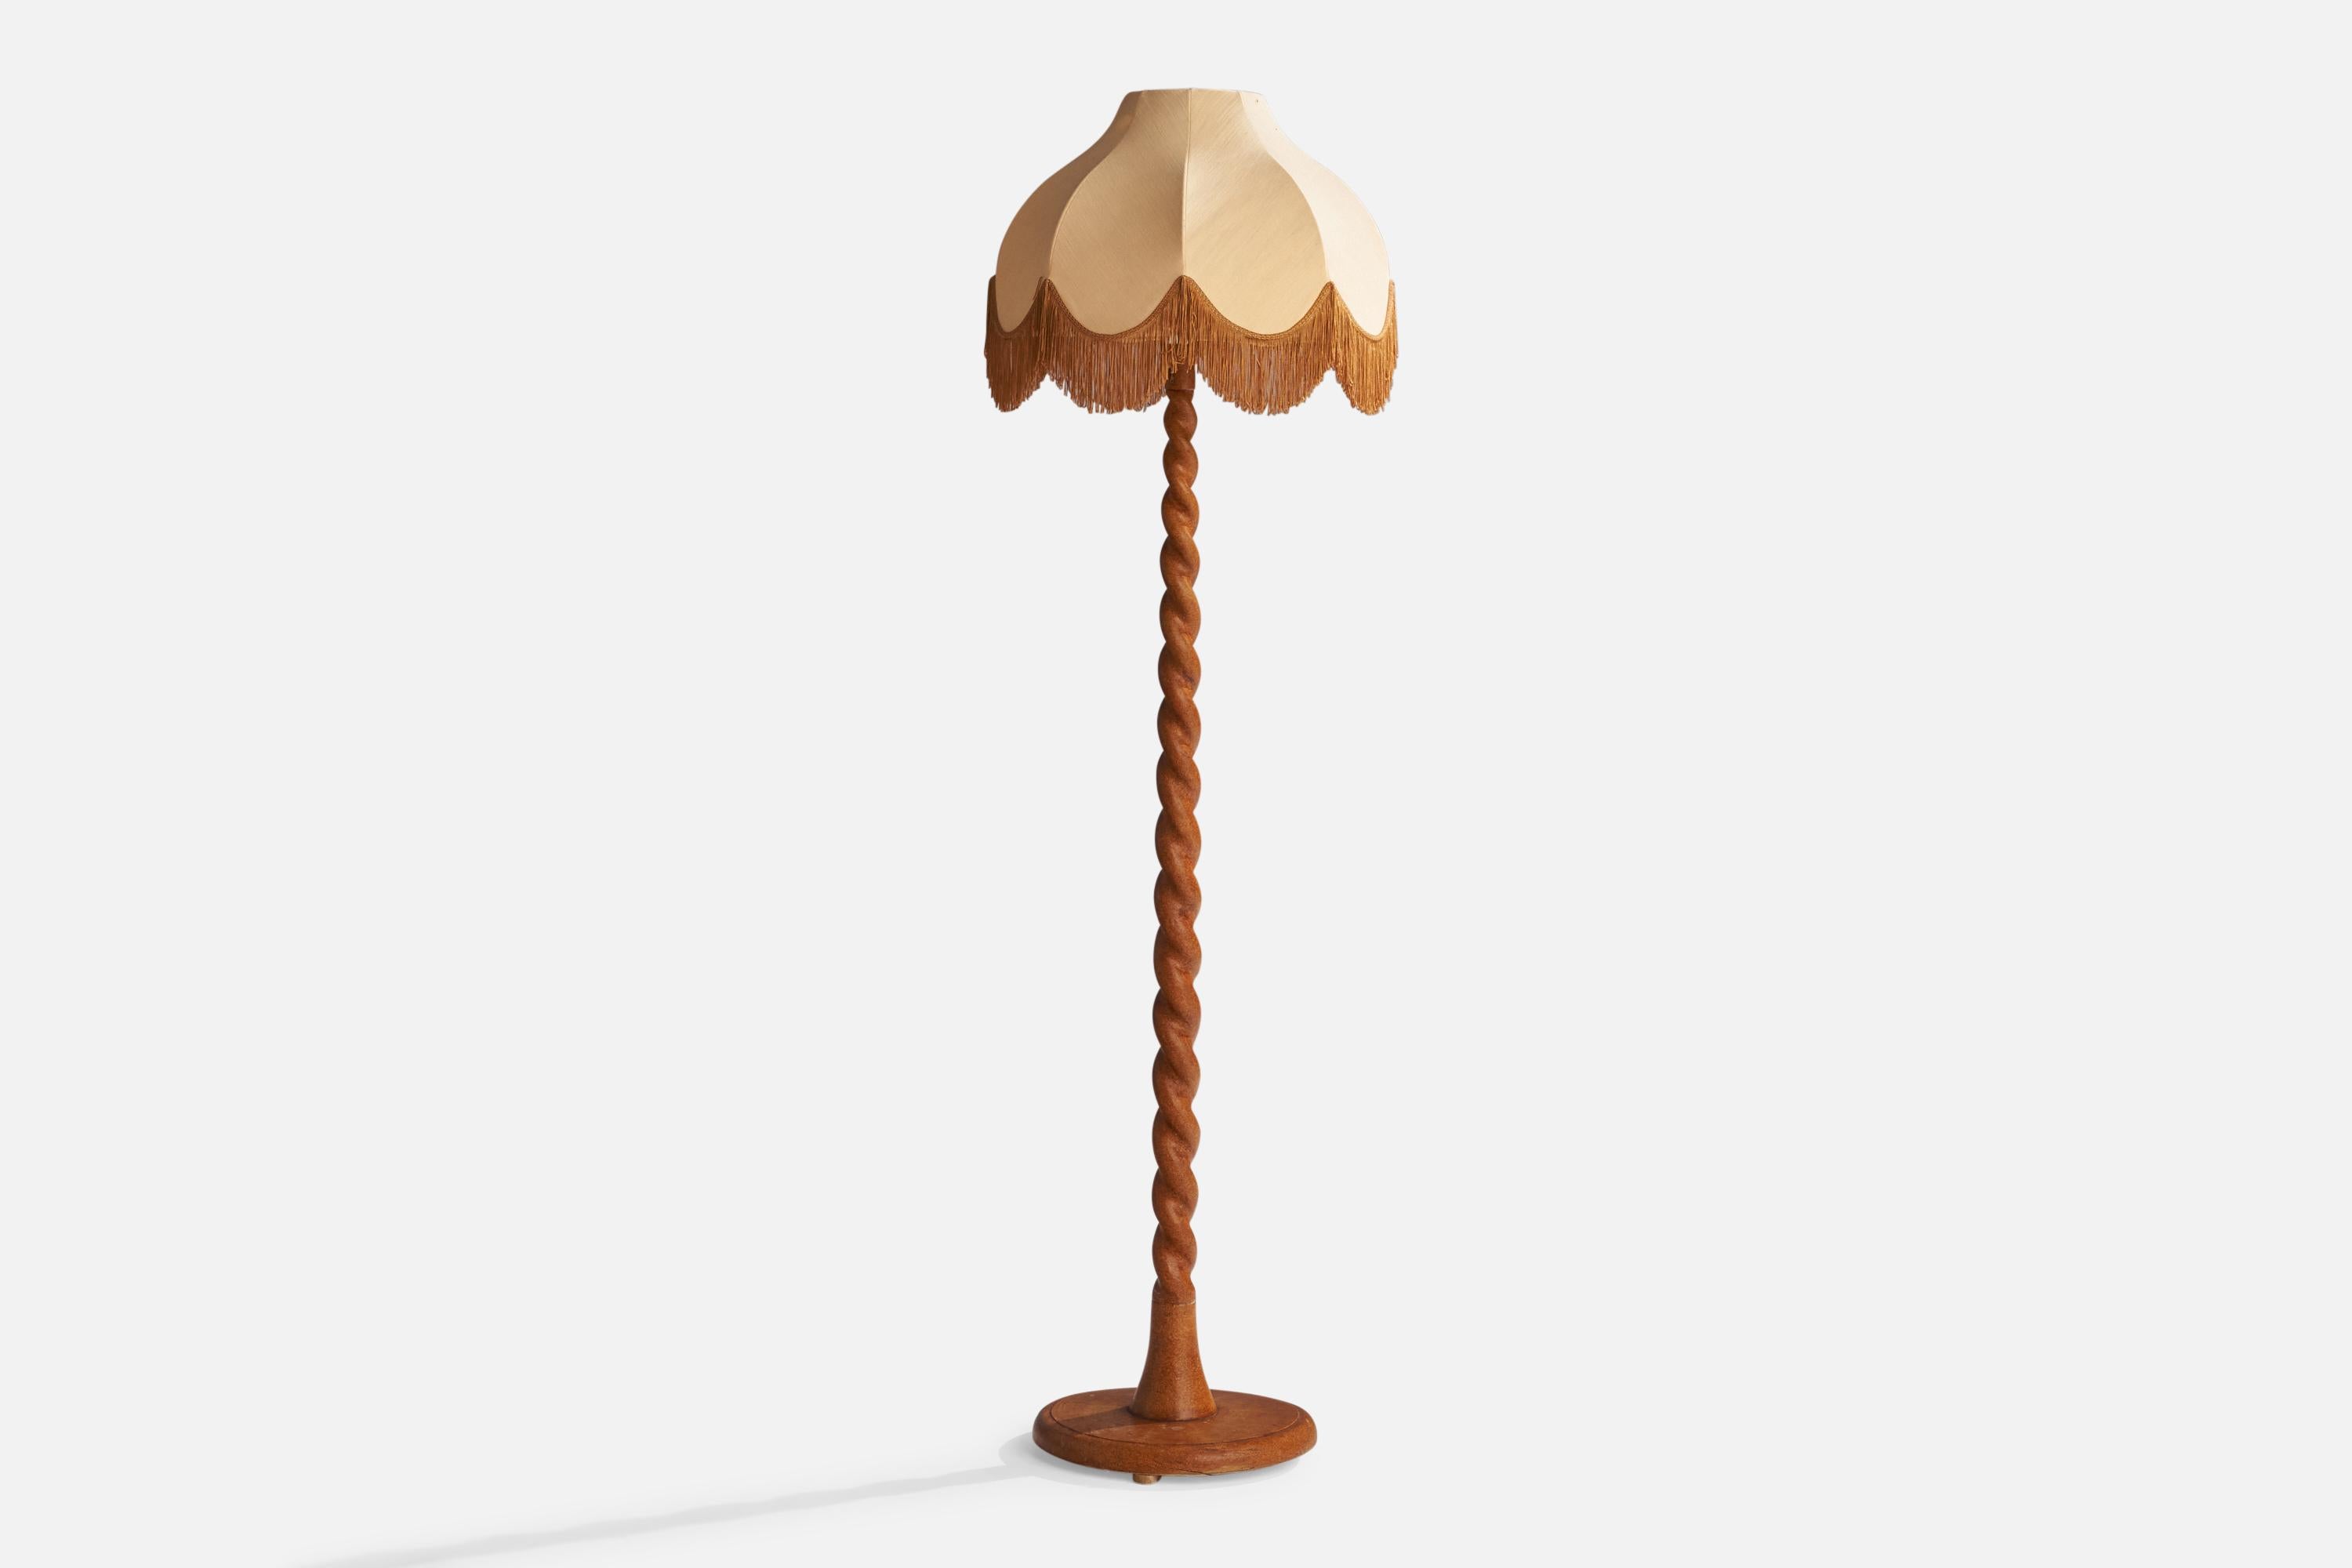 A birch and beige fabric floor lamp designed and produced in Sweden, c. 1920s.

Overall Dimensions (inches): 67”  H x 18”  W x 20” D
Stated dimensions include shade.
Bulb Specifications: E-26 Bulb
Number of Sockets: 1
All lighting will be converted